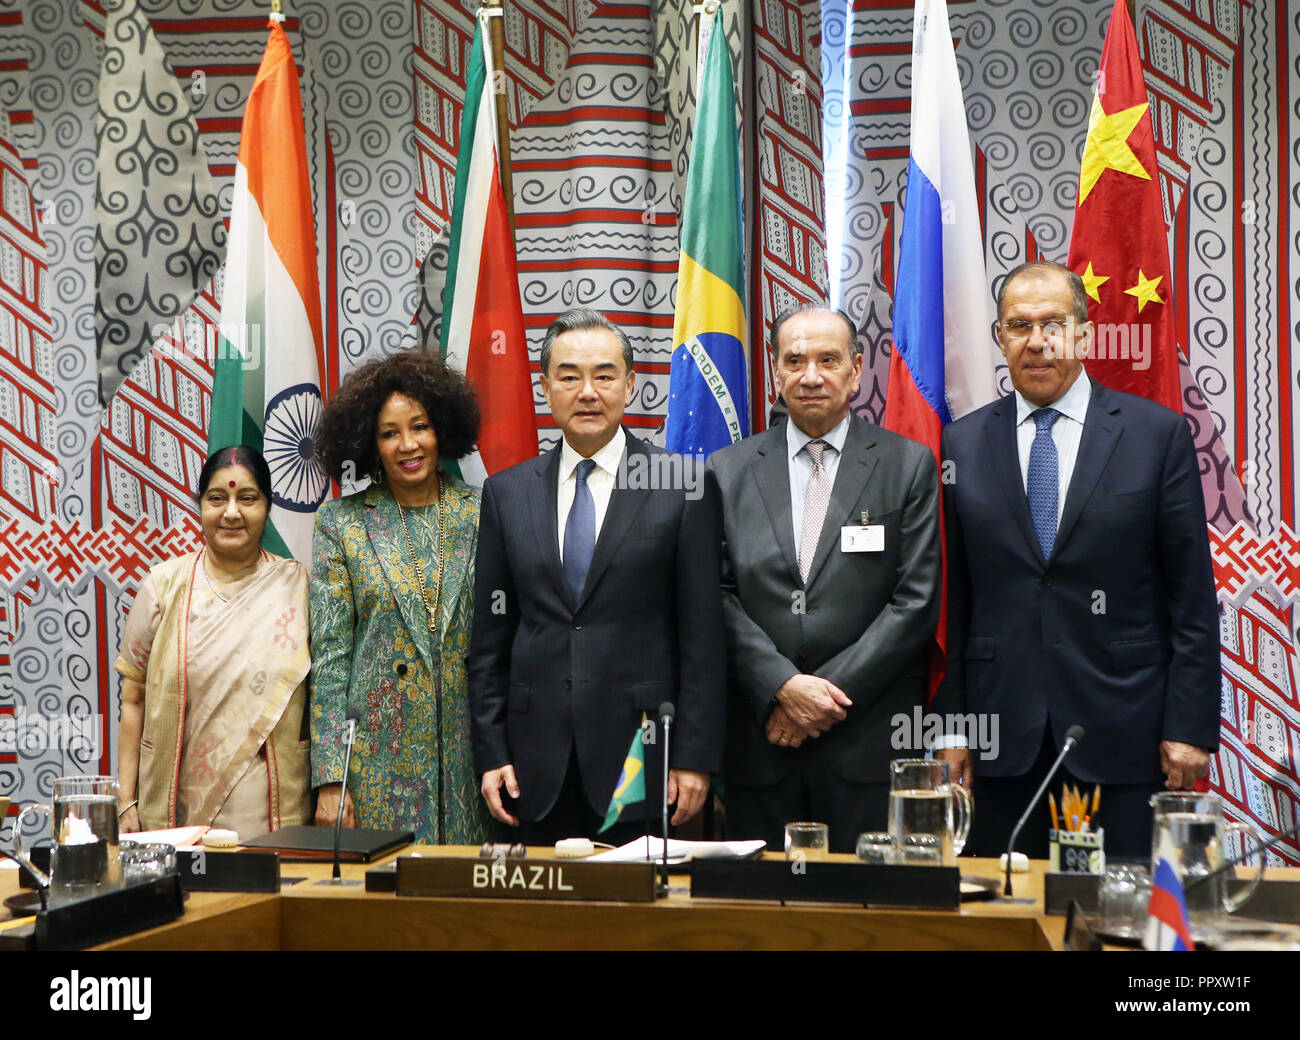 (180928) -- UNITED NATIONS, Sep. 28, 2018 (Xinhua) -- Chinese State Councilor and Foreign Minister Wang Yi (C) poses for a group photo with Indian External Affairs Minister Sushma Swaraj (1st L), South African Minister of International Relations and Cooperation Lindiwe Sisulu (2nd L), Brazilian Foreign Minister Aloysio Nunes (2nd R) and Russian Foreign Minister Sergey Lavrov before their meeting at the UN headquarters in New York, on Sept. 27, 2018. Foreign ministers of Brazil, Russia, India, China and South Africa (BRICS) vowed on Thursday to uphold multilateralism, safeguard international la Stock Photo